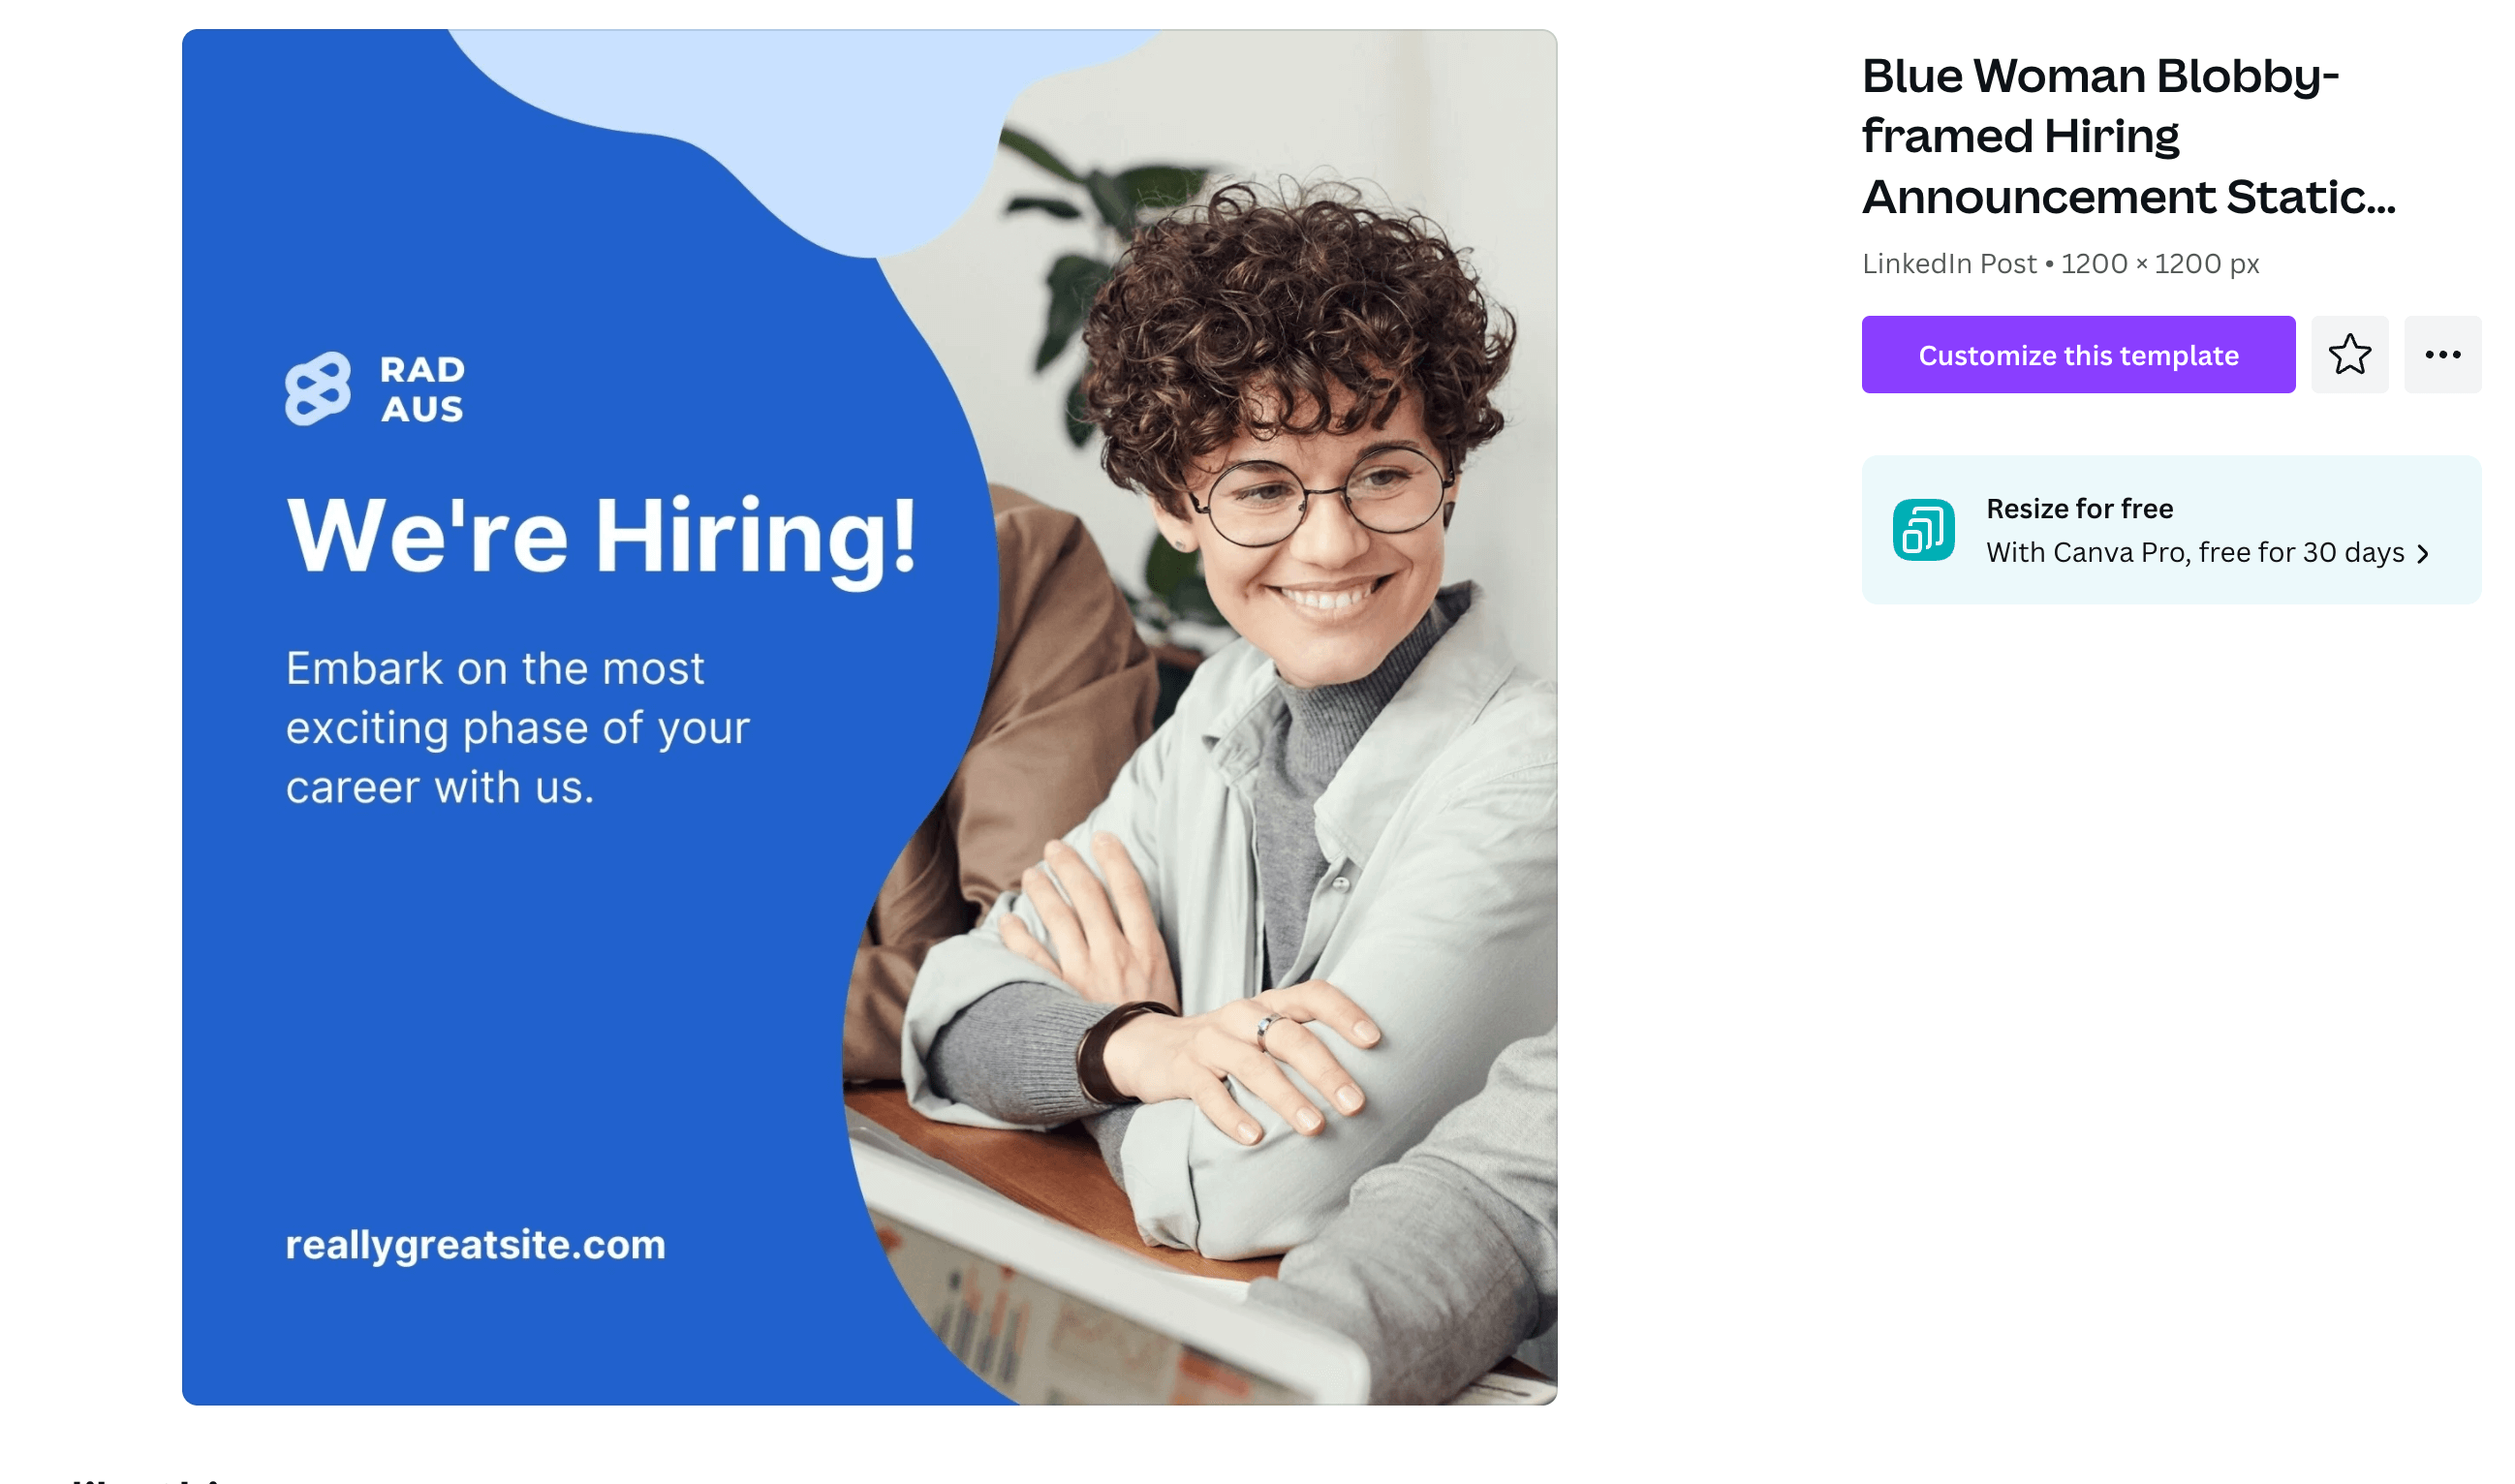 A "We're Hiring" graphic featuring a smiling young professional